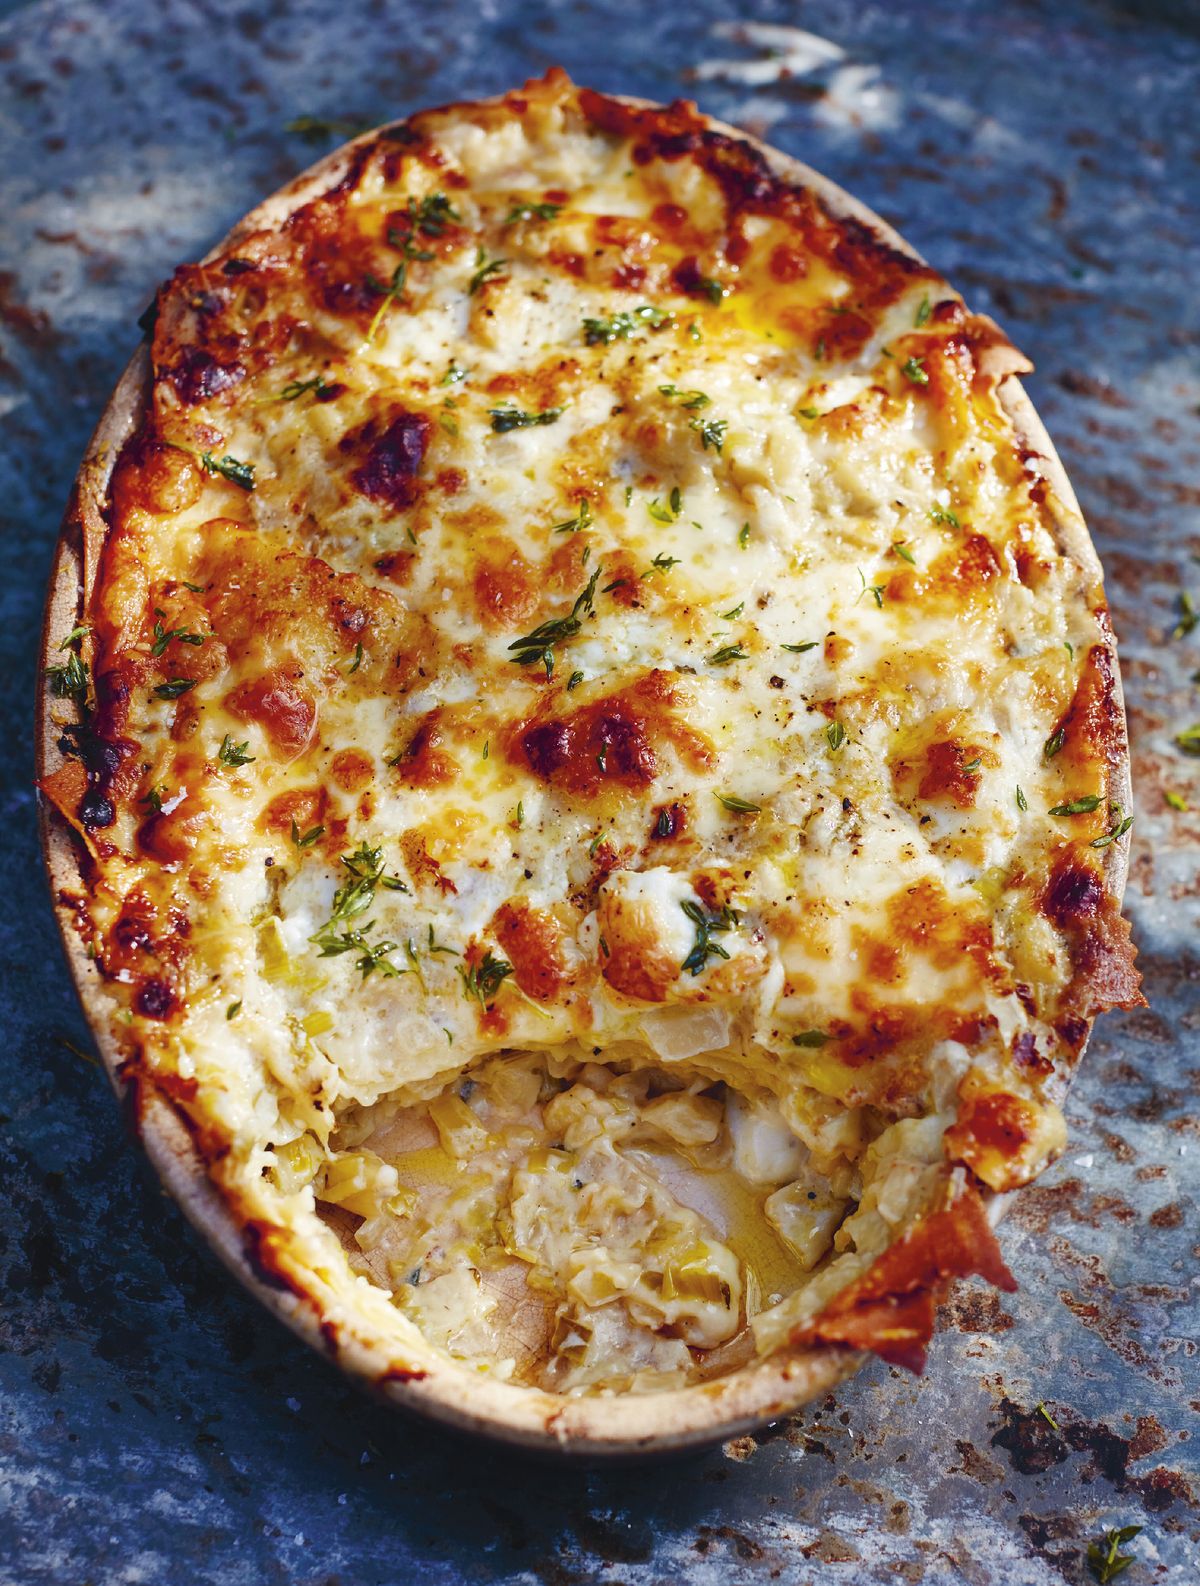 Jamie Oliver’s Lasagne: Slow-cooked fennel, sweet leeks and cheeses